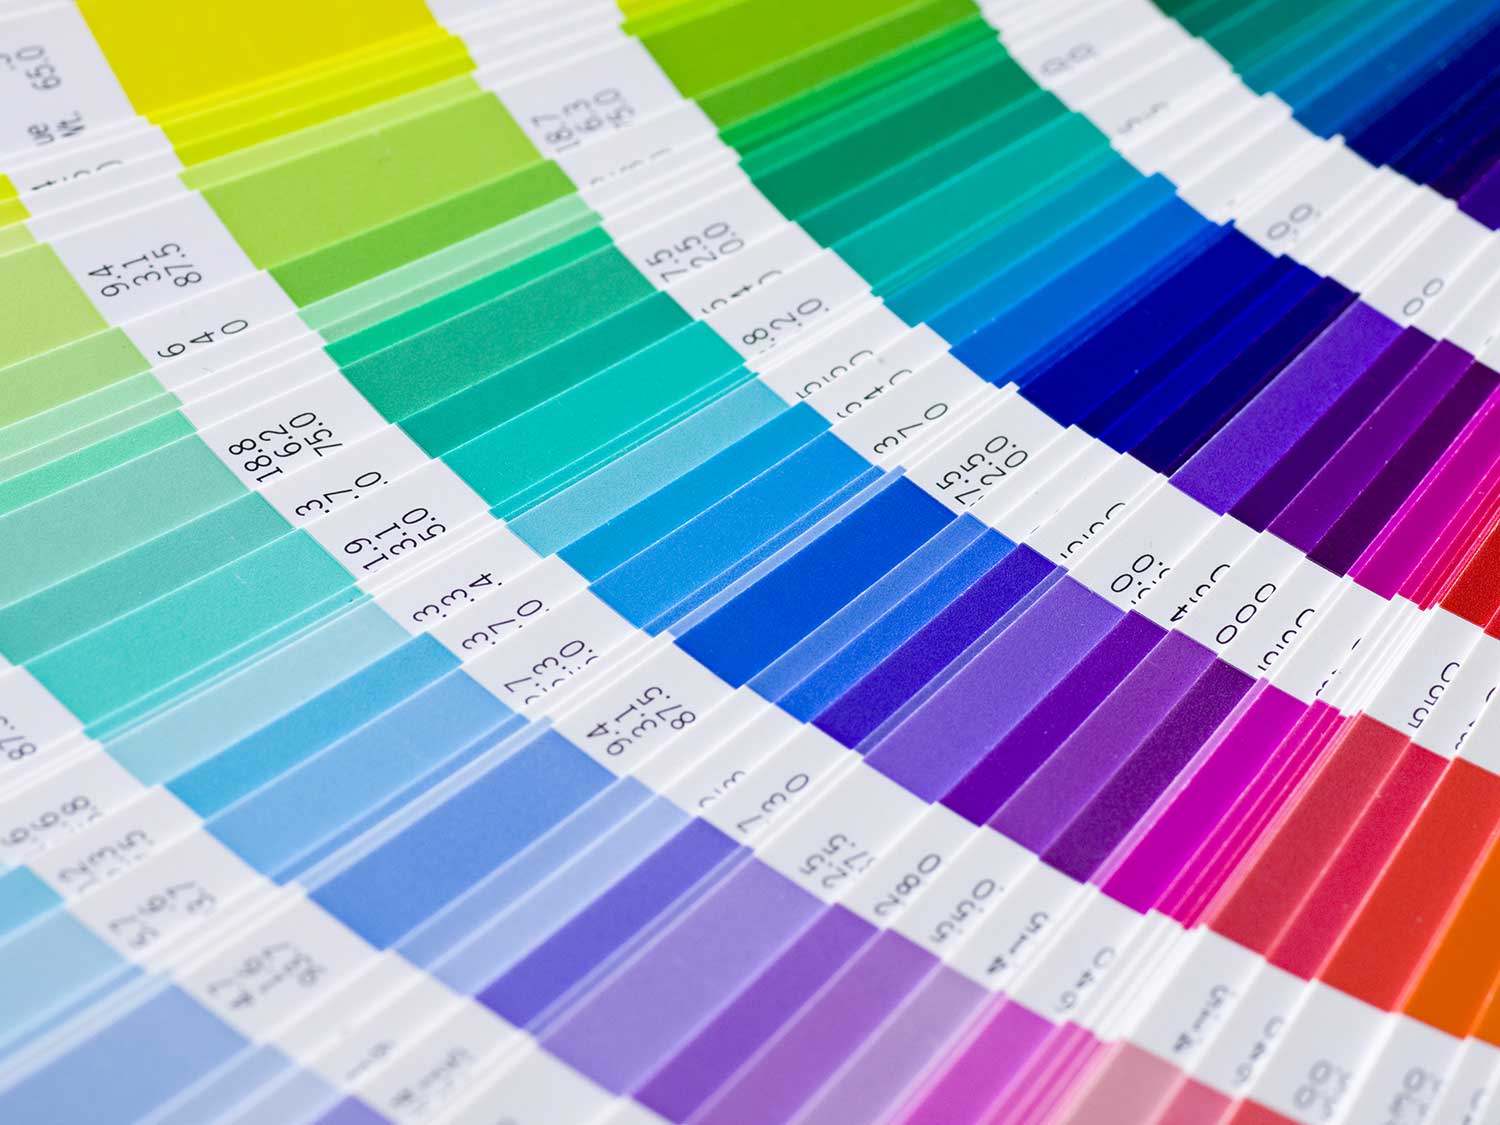 Colours that talk for your brand